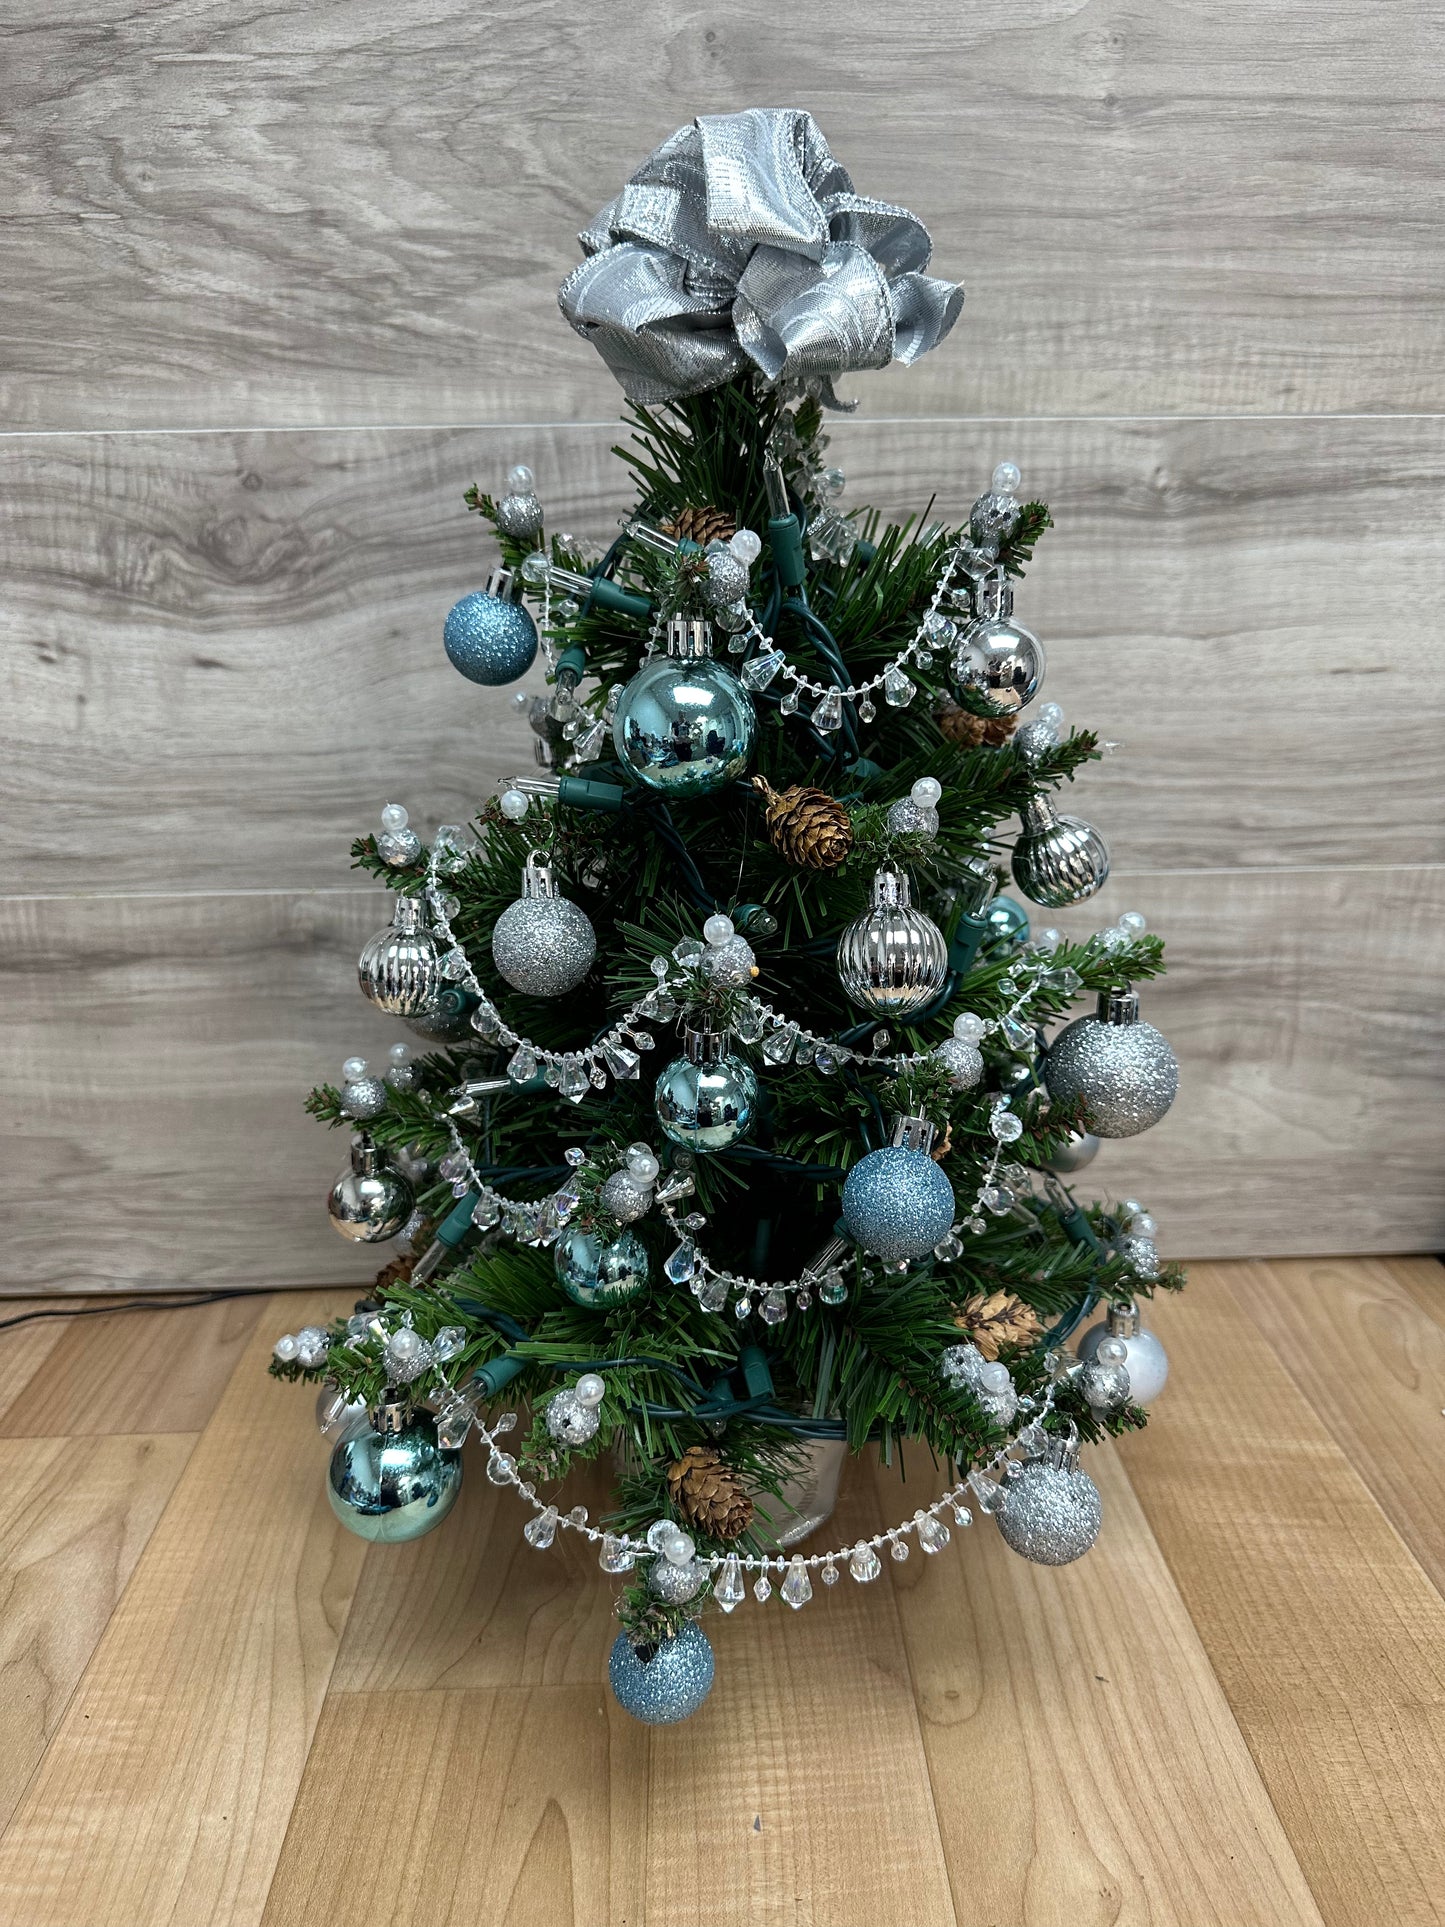 18” Mini lighted Christmas Tree with silver and blue ornaments made by hand